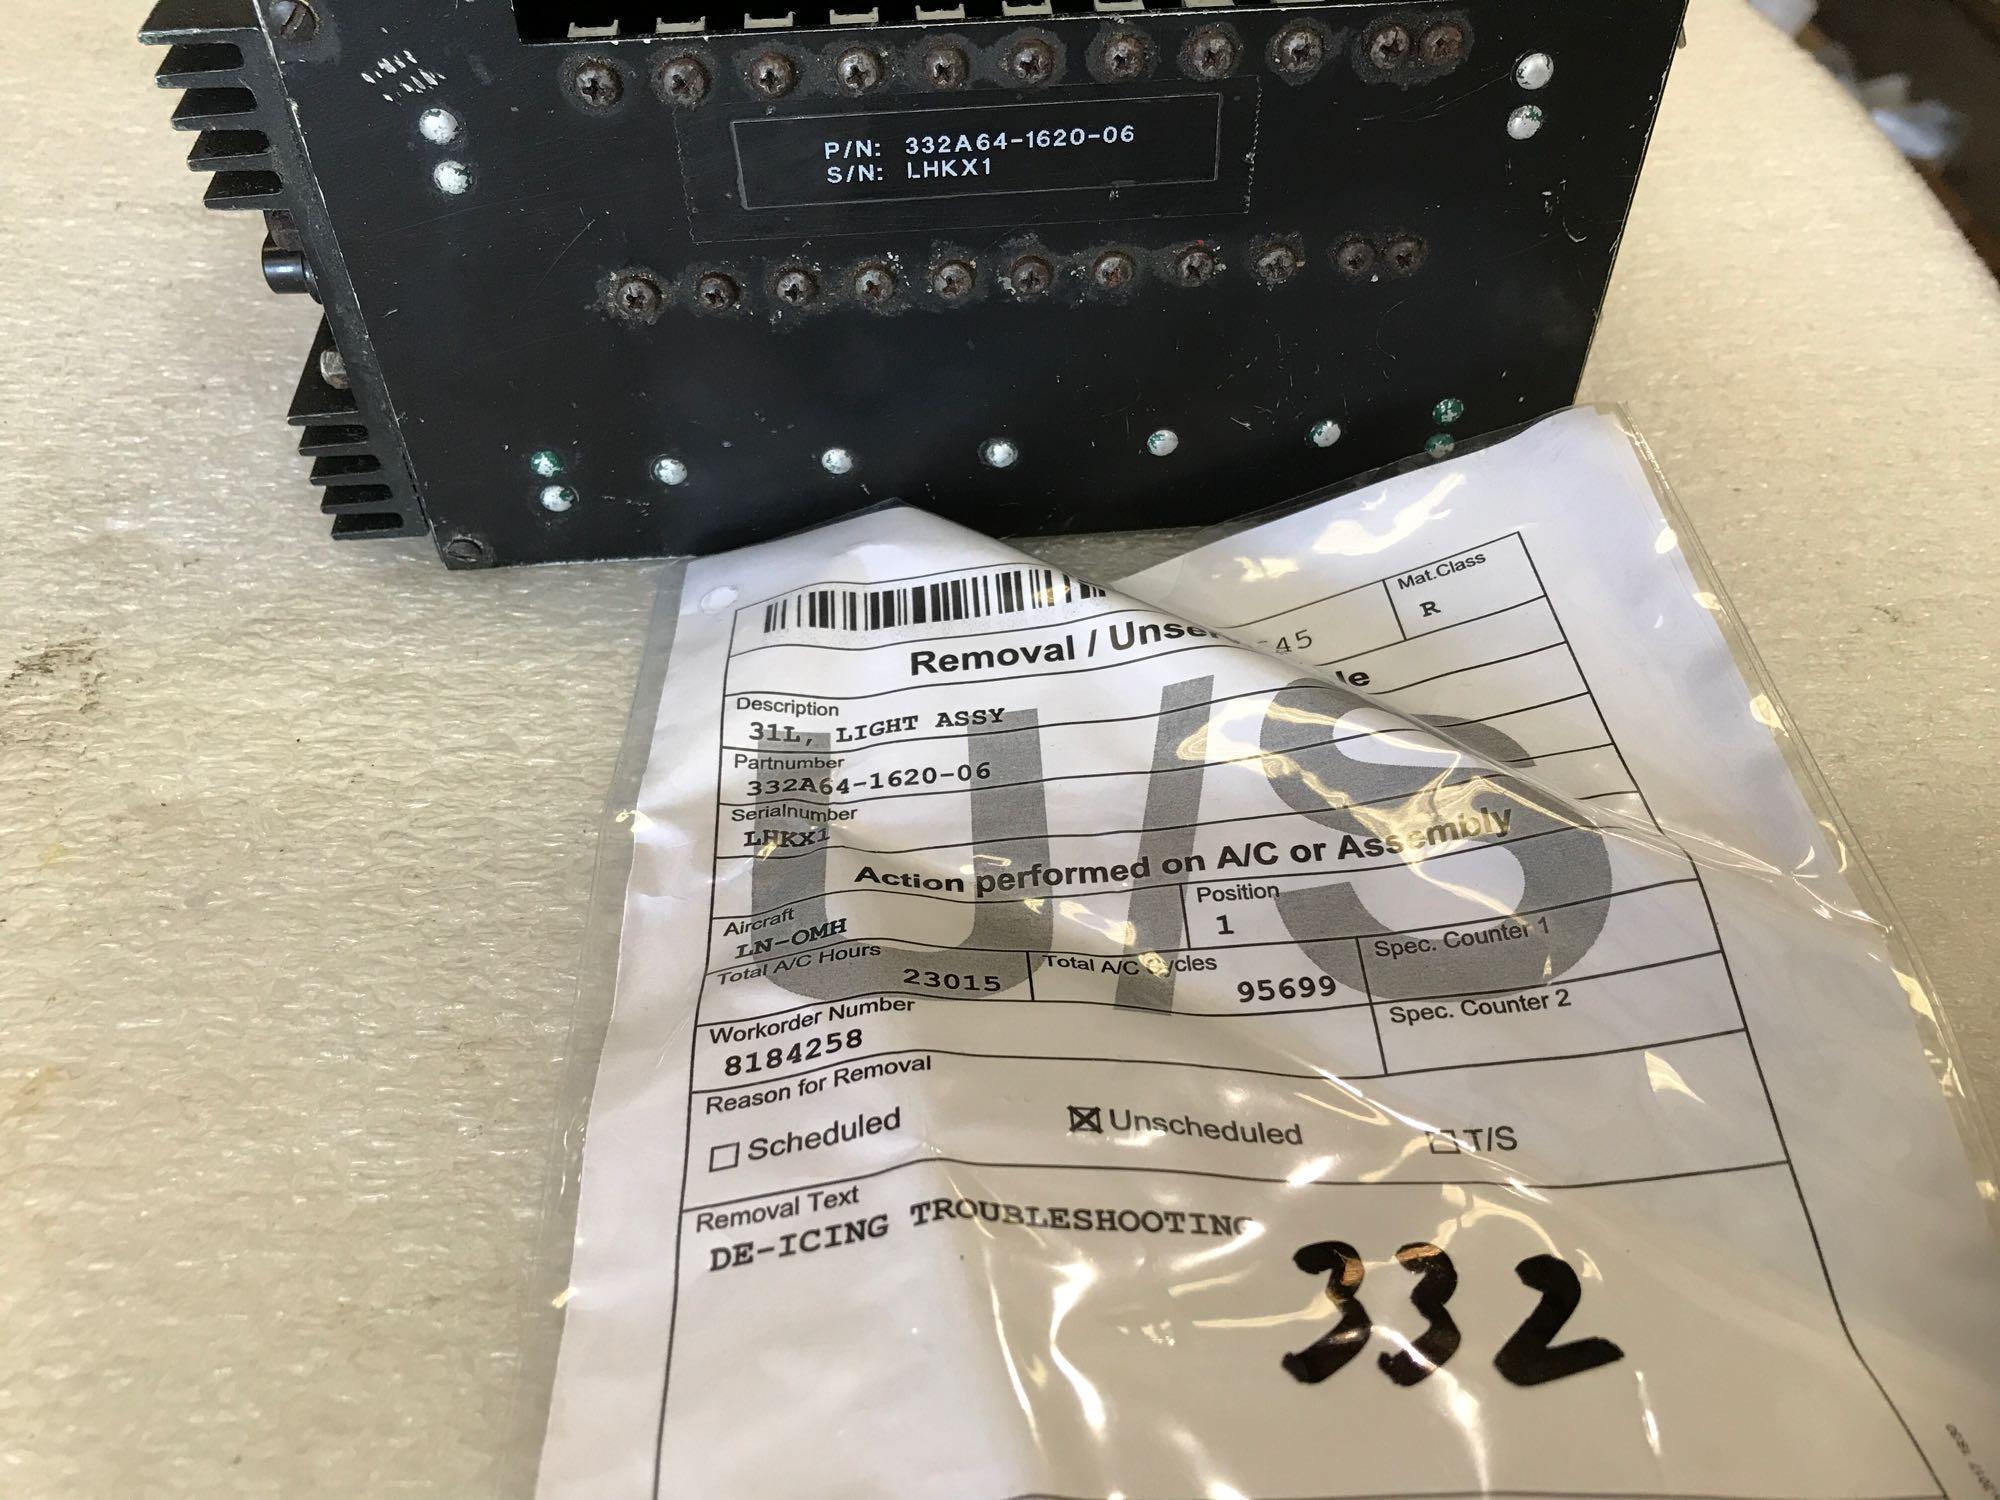 SUPER PUMA LIGHT CONTROLLERS 332A64-1620-06 (REMOVED FROM TEAR DOWNS & TROUBLESHOOTING)